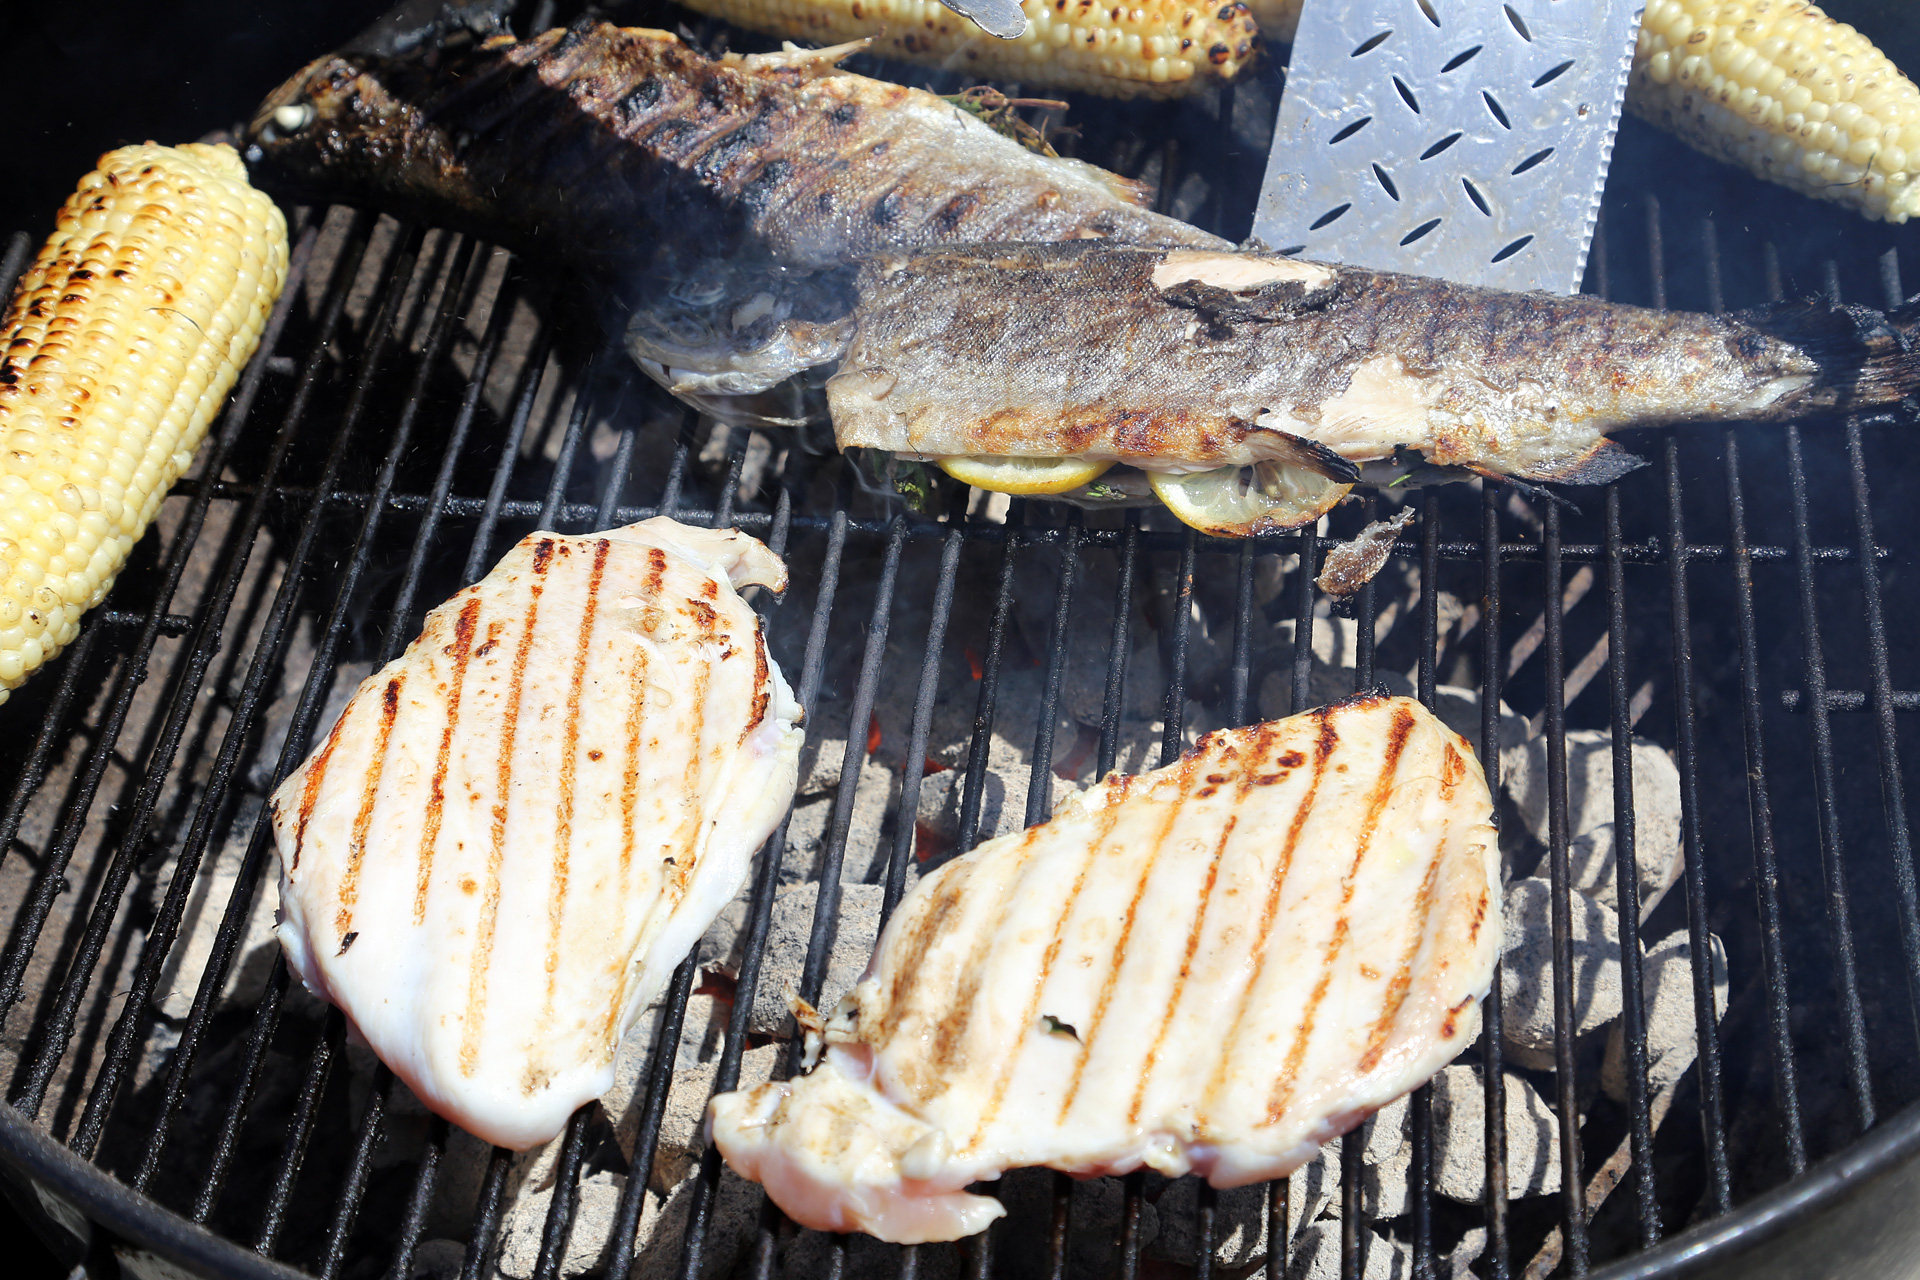 Grill over the fire until nicely seared on both sides, turning occasionally, about 2 minutes on each side.